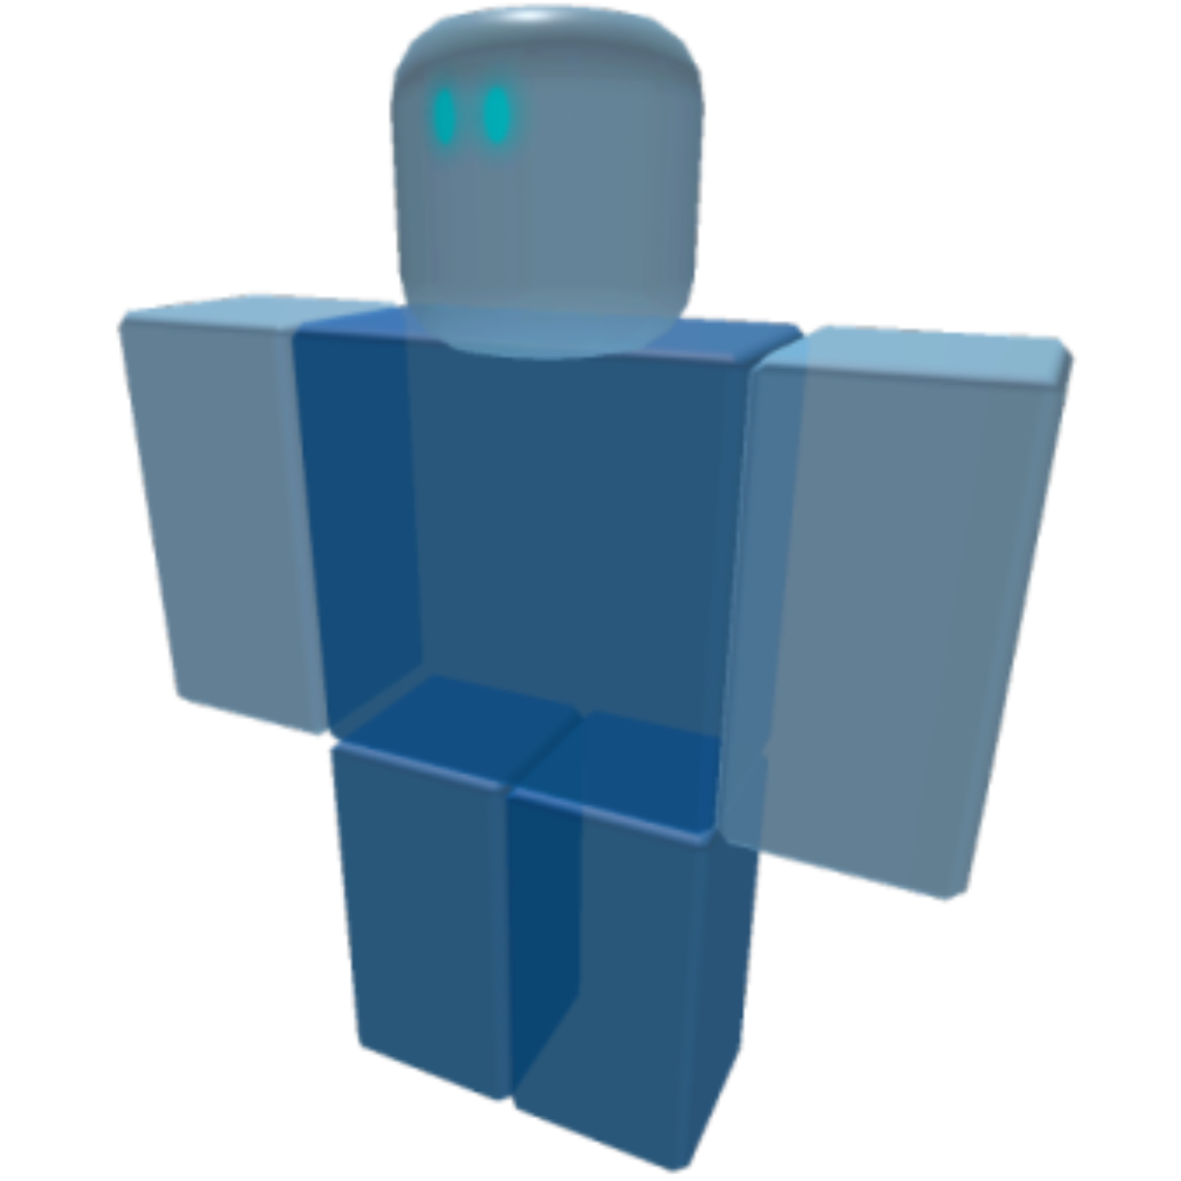 Made some crazy Builderman 666 frames for a Roblox animation